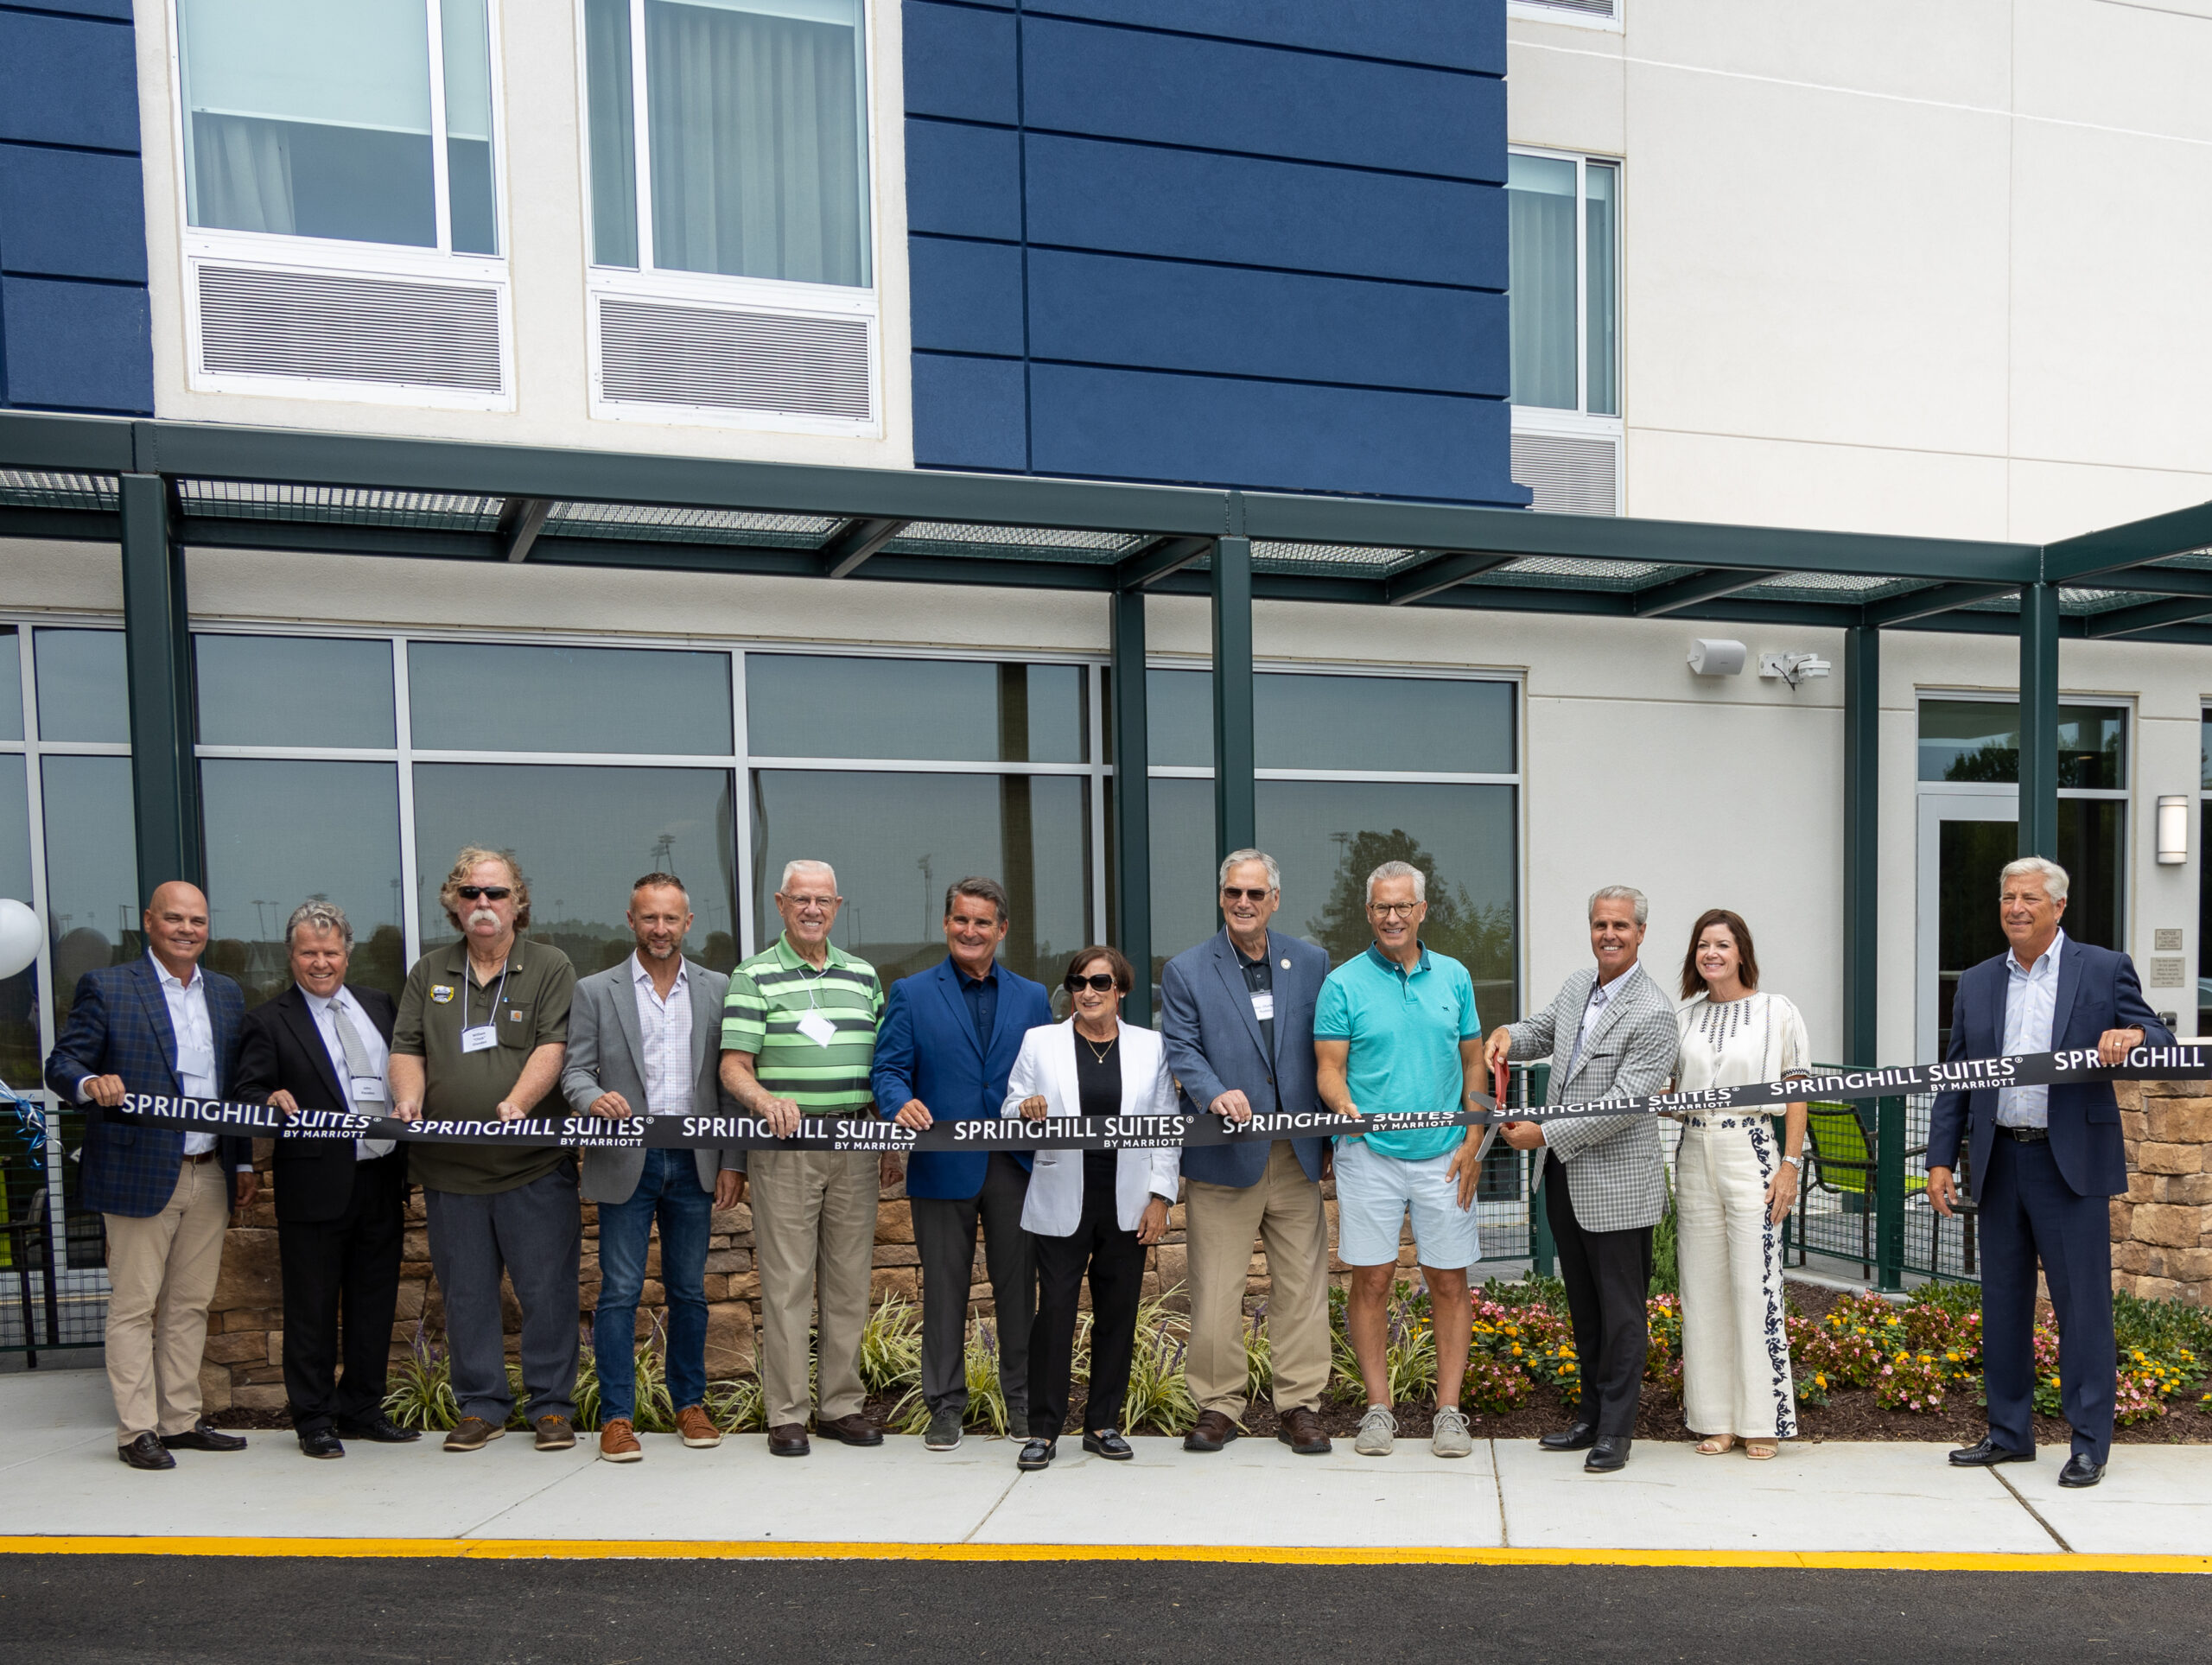 Mike Meoli along with other dignitaries cut a large ribbon in front of new SpringHill Suites hotel in Frederica, DE